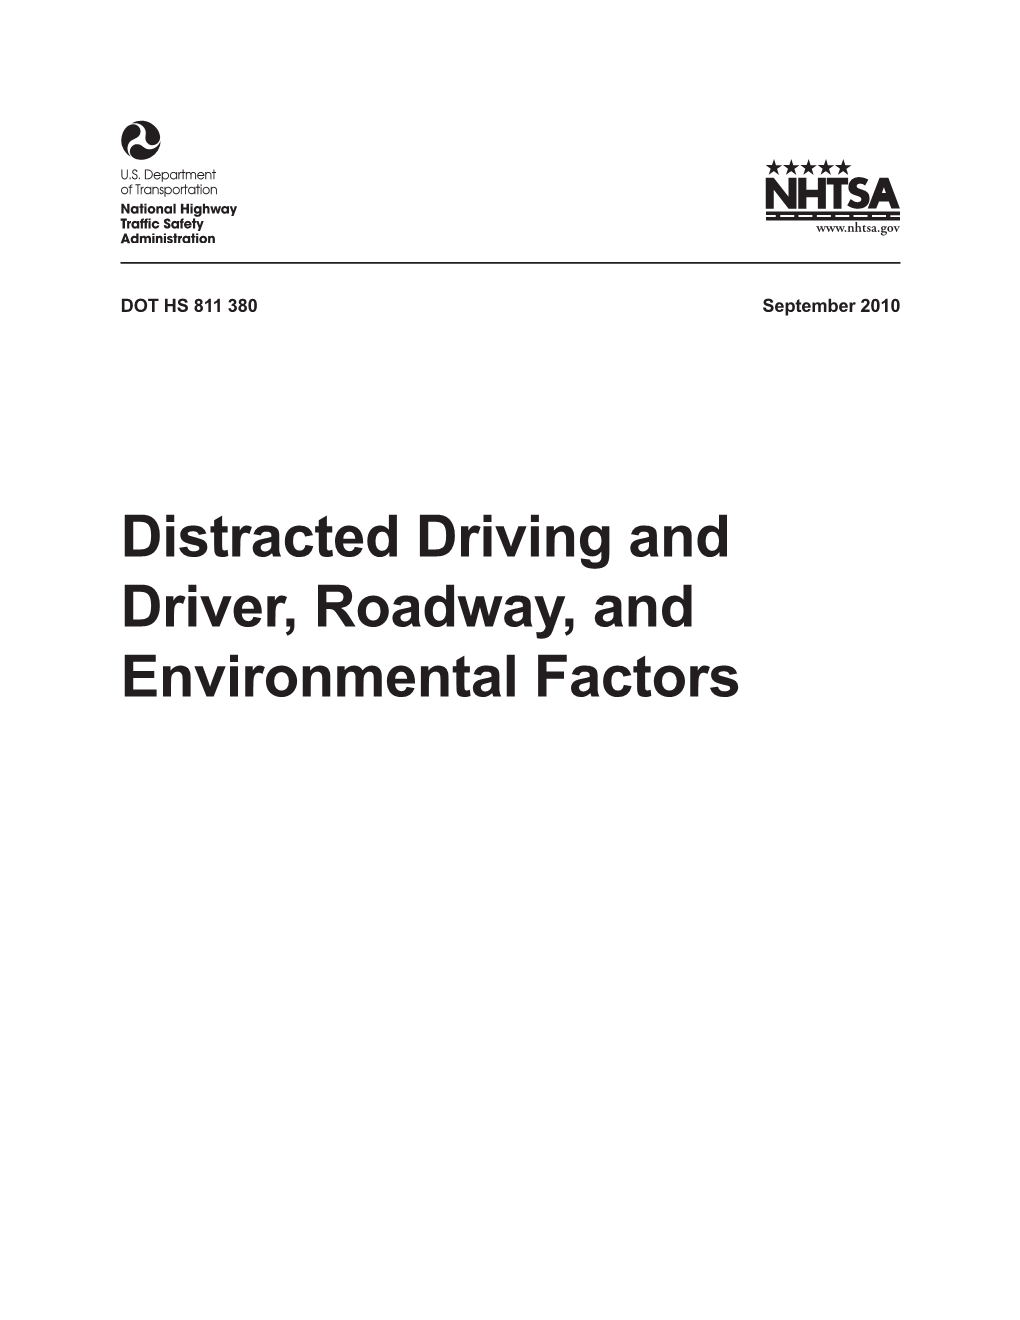 Distracted Driving and Driver, Roadway, and Environmental Factors This Publication Is Distributed by the U.S